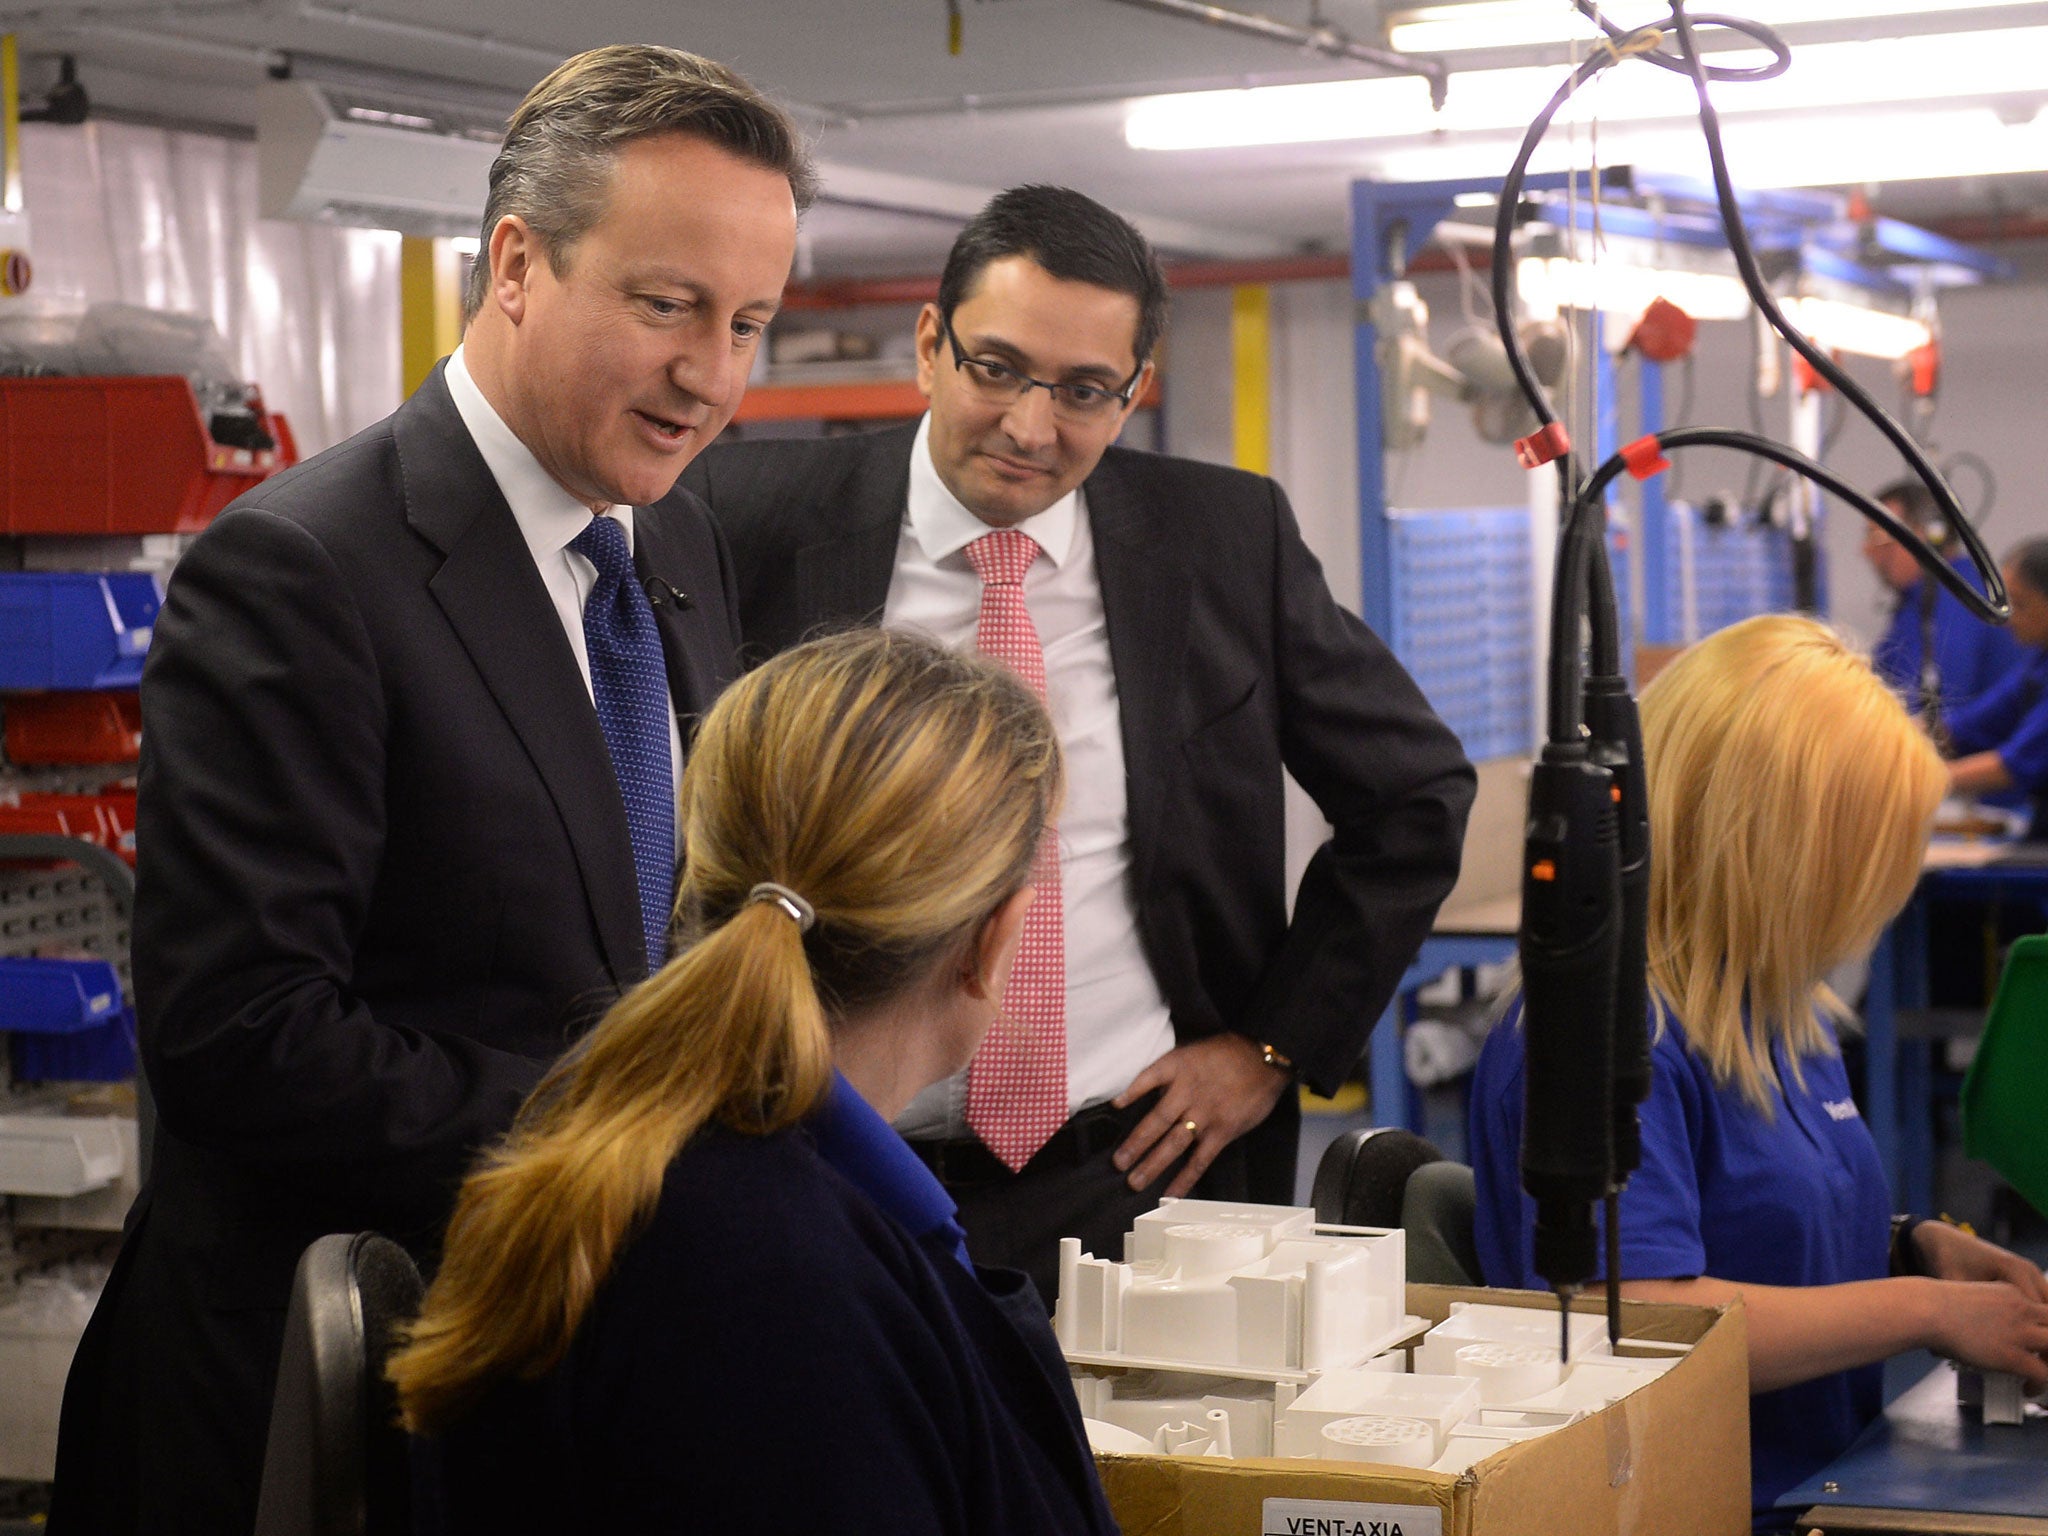 David Cameron visiting the headquarters of ventilation manufacturer, Vent-Axia in Crawley, East Sussex; the company has recently created 26 new jobs by moving production back to the UK from China